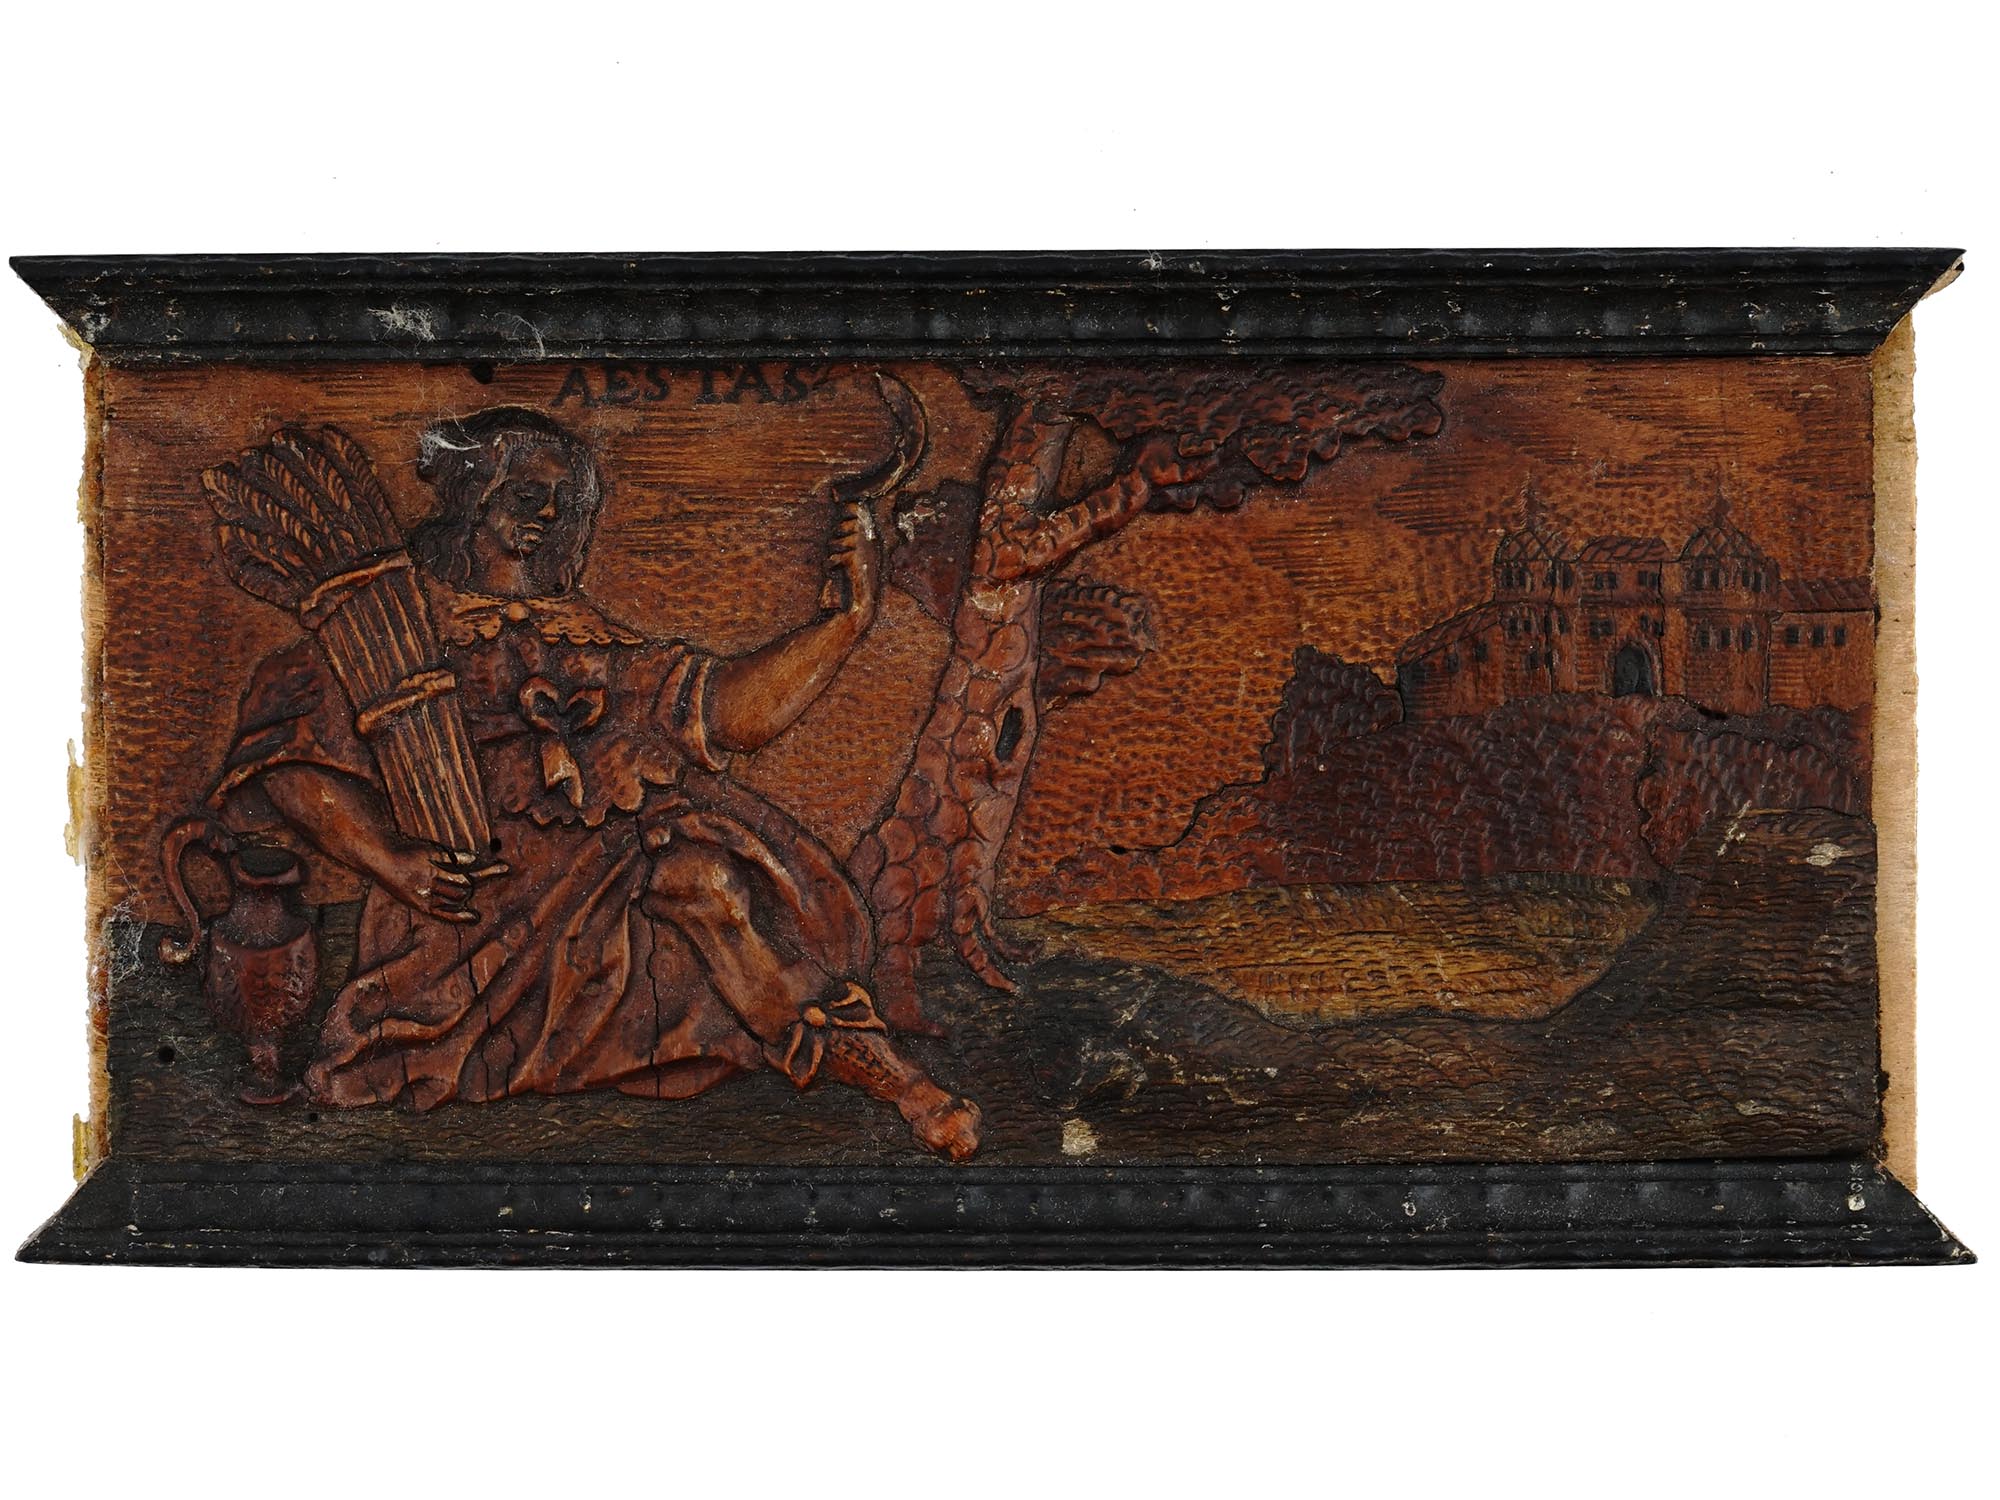 ANTIQUE 1700S HAND CARVED ALLEGORICAL WOODEN PANELS PIC-2